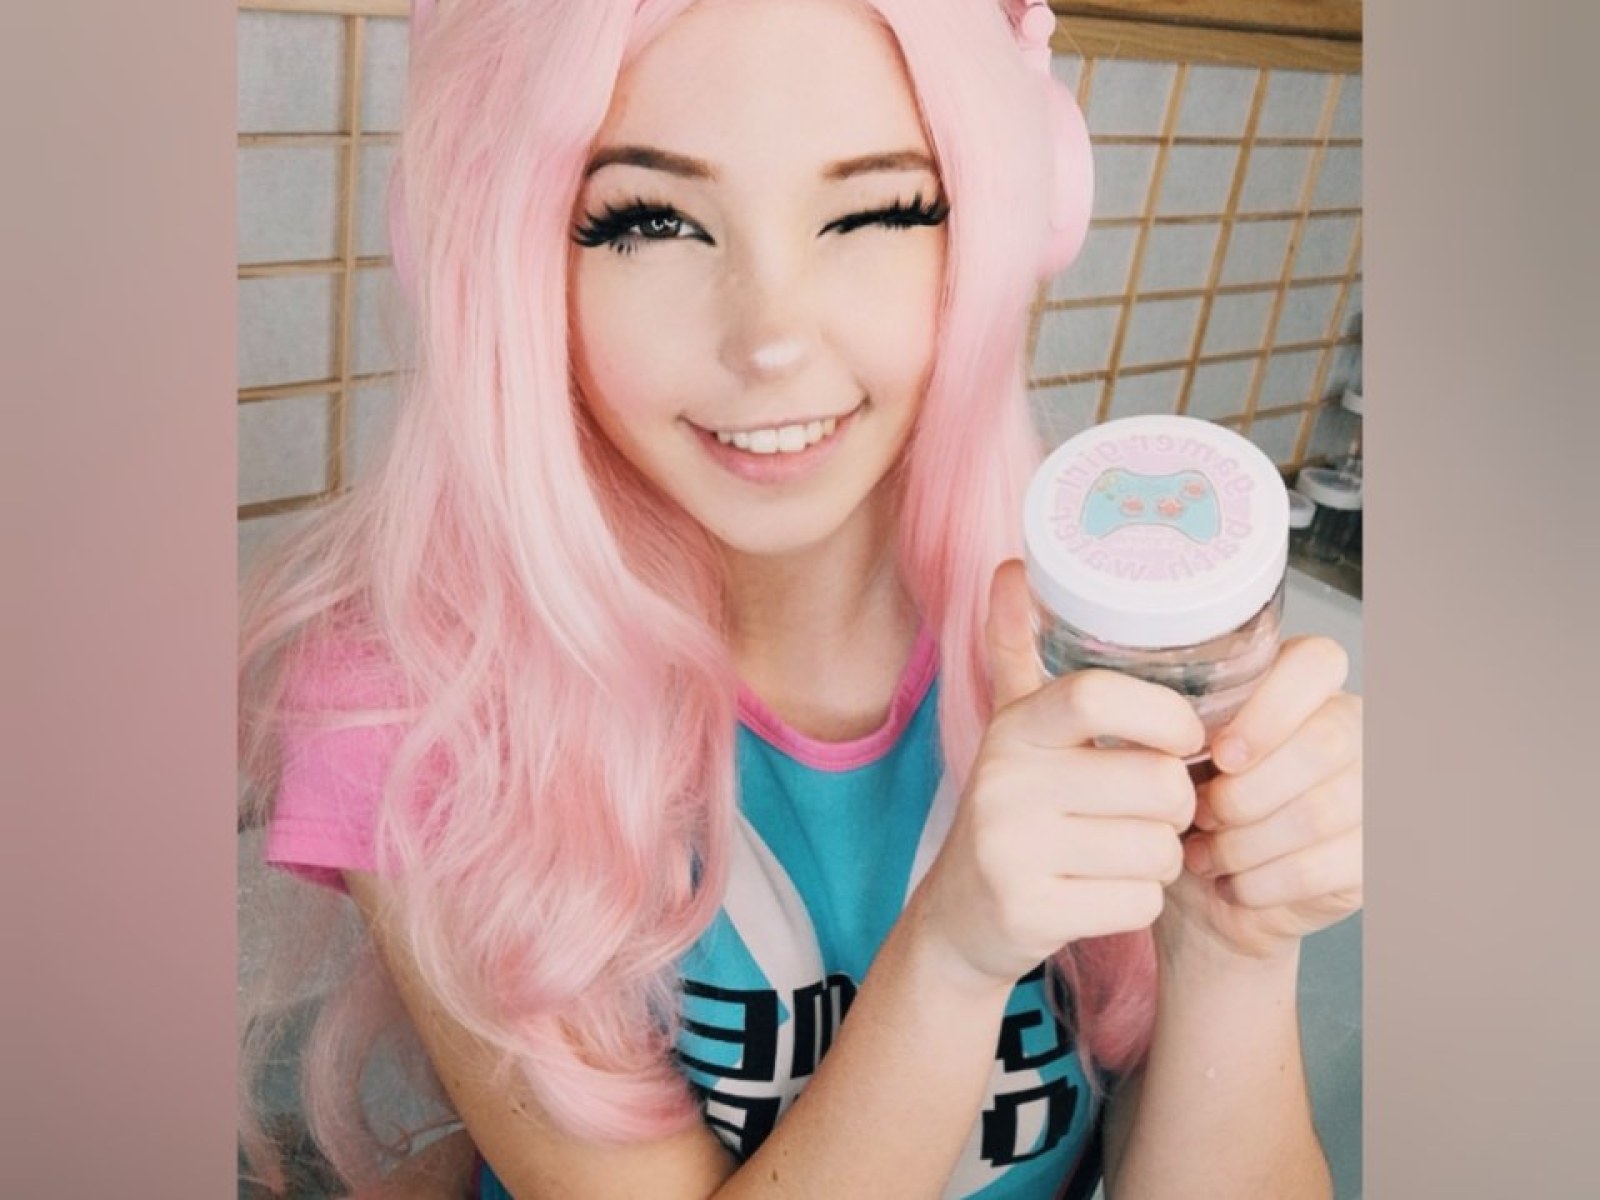 Belle Delphine Controversy: No DNA Bath Water and Herpes Rumor Debunked